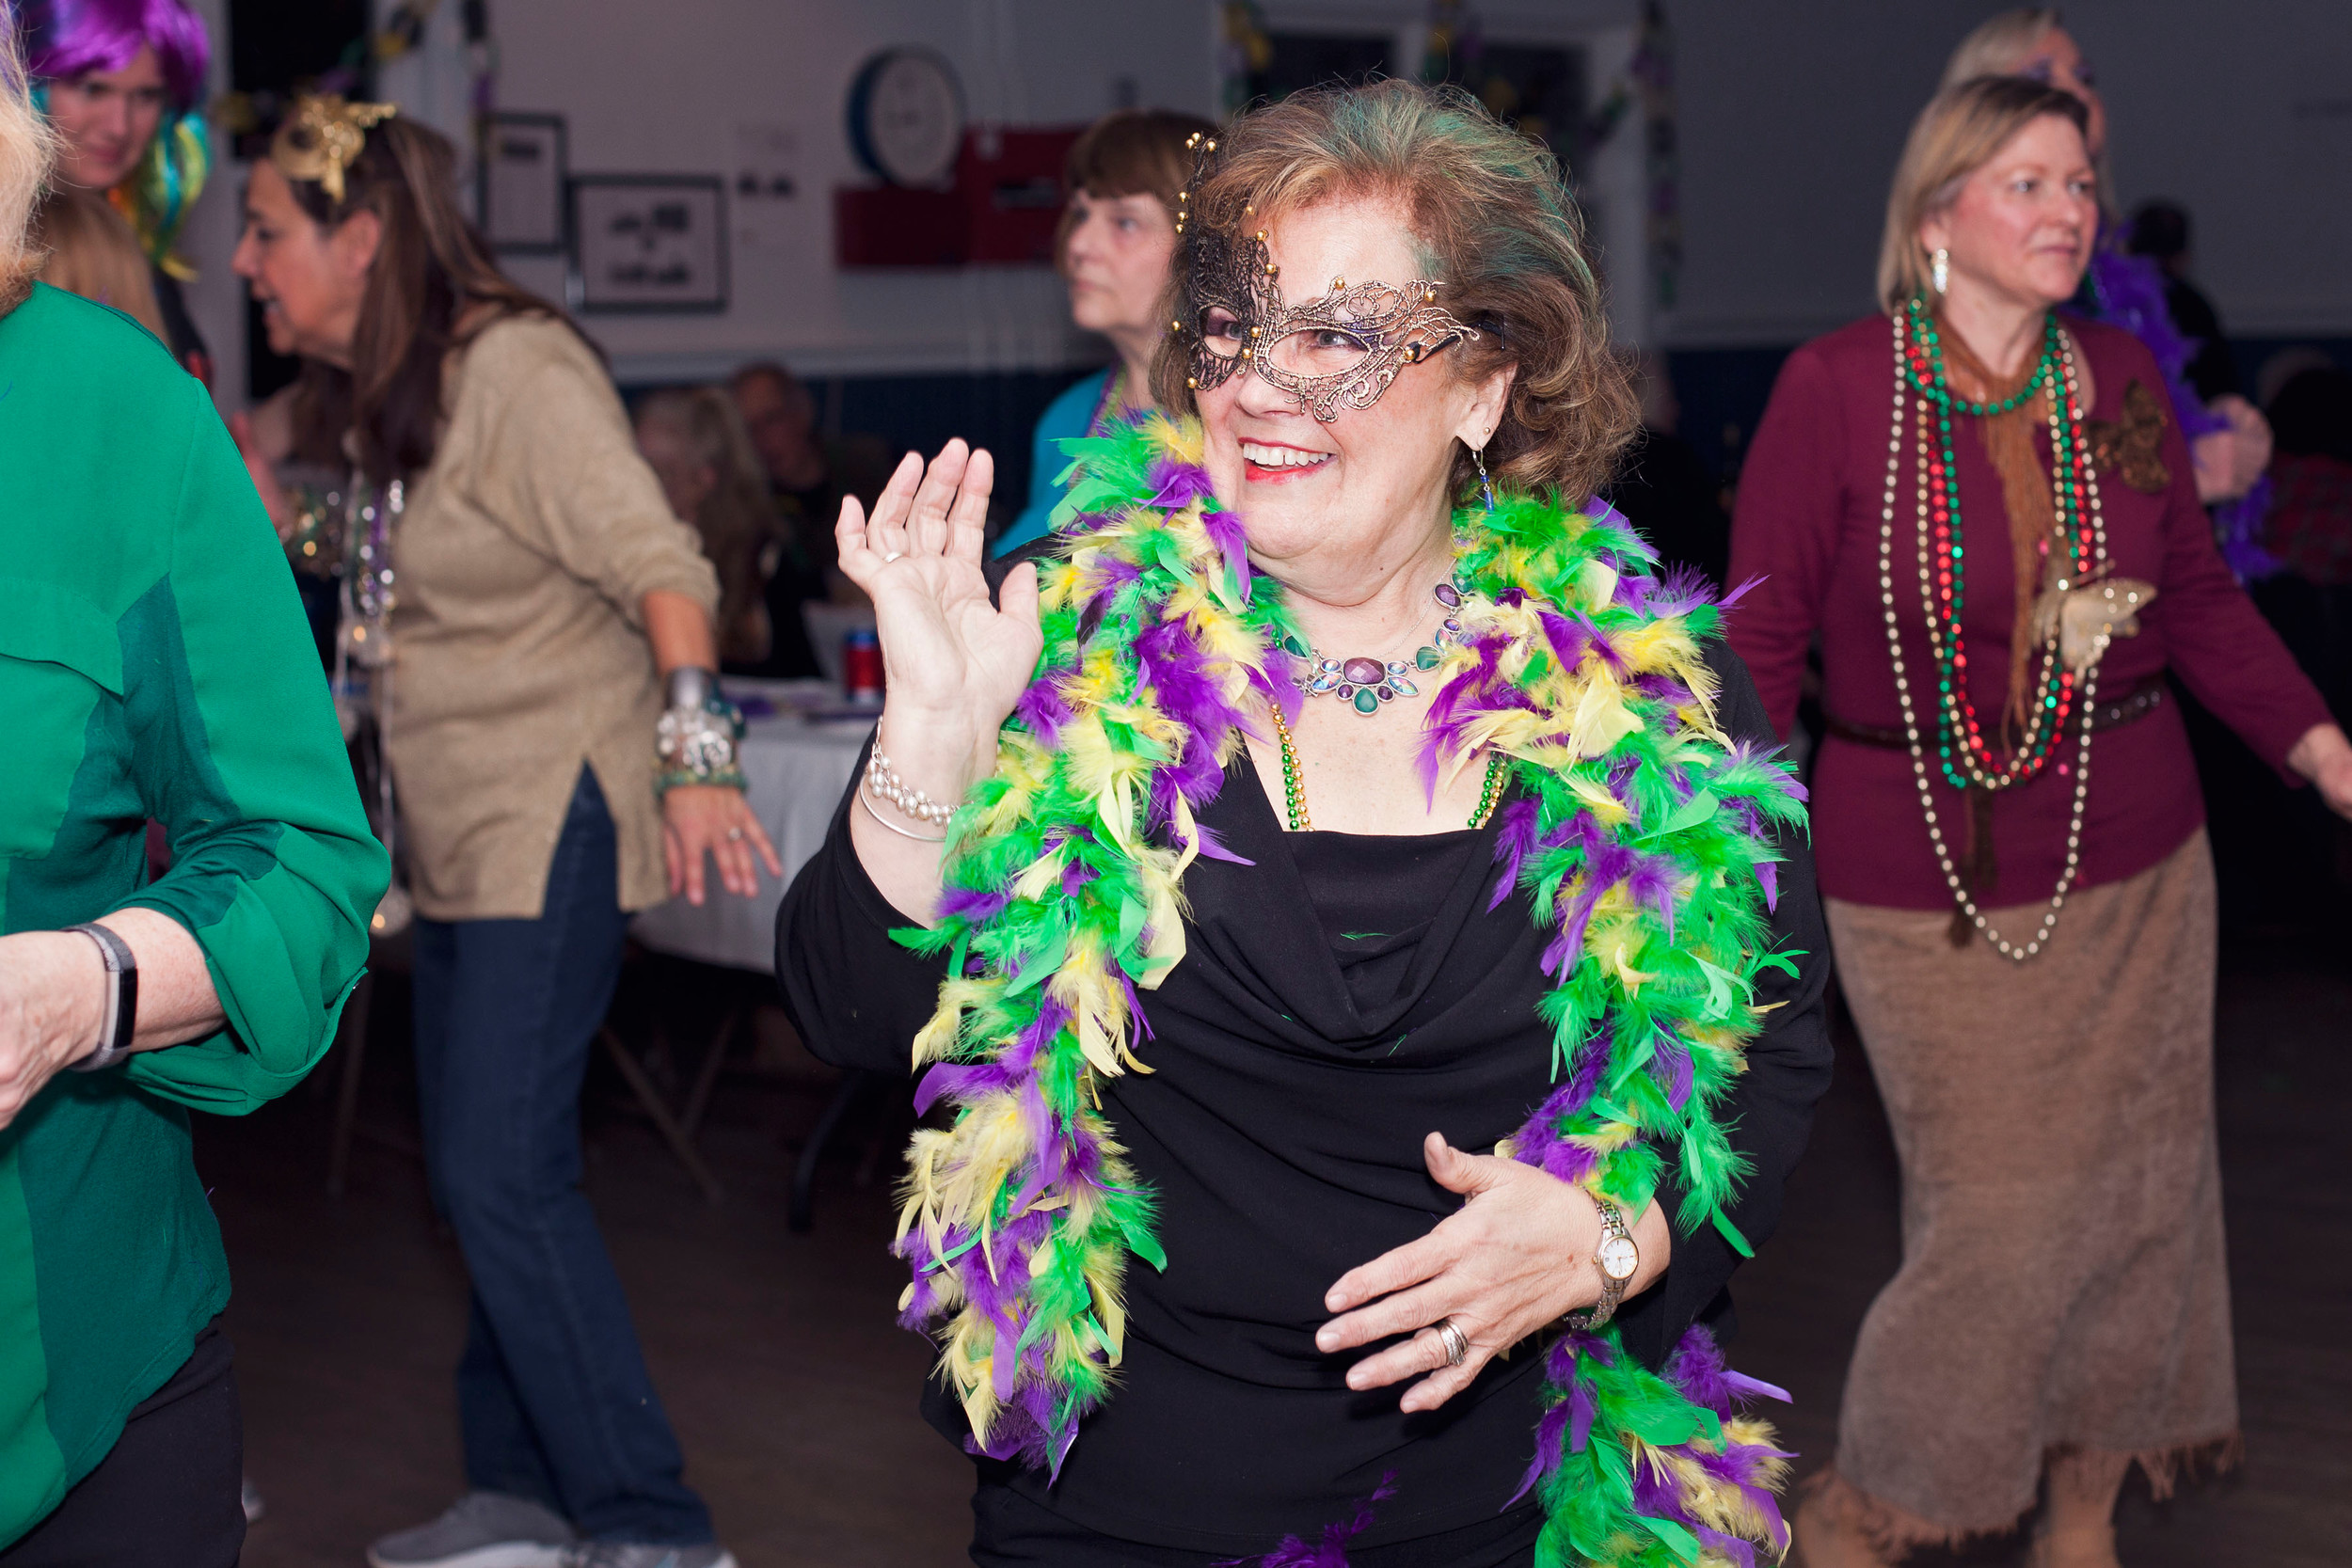 Mardi Gras revelers let the good times roll in Portsmouth